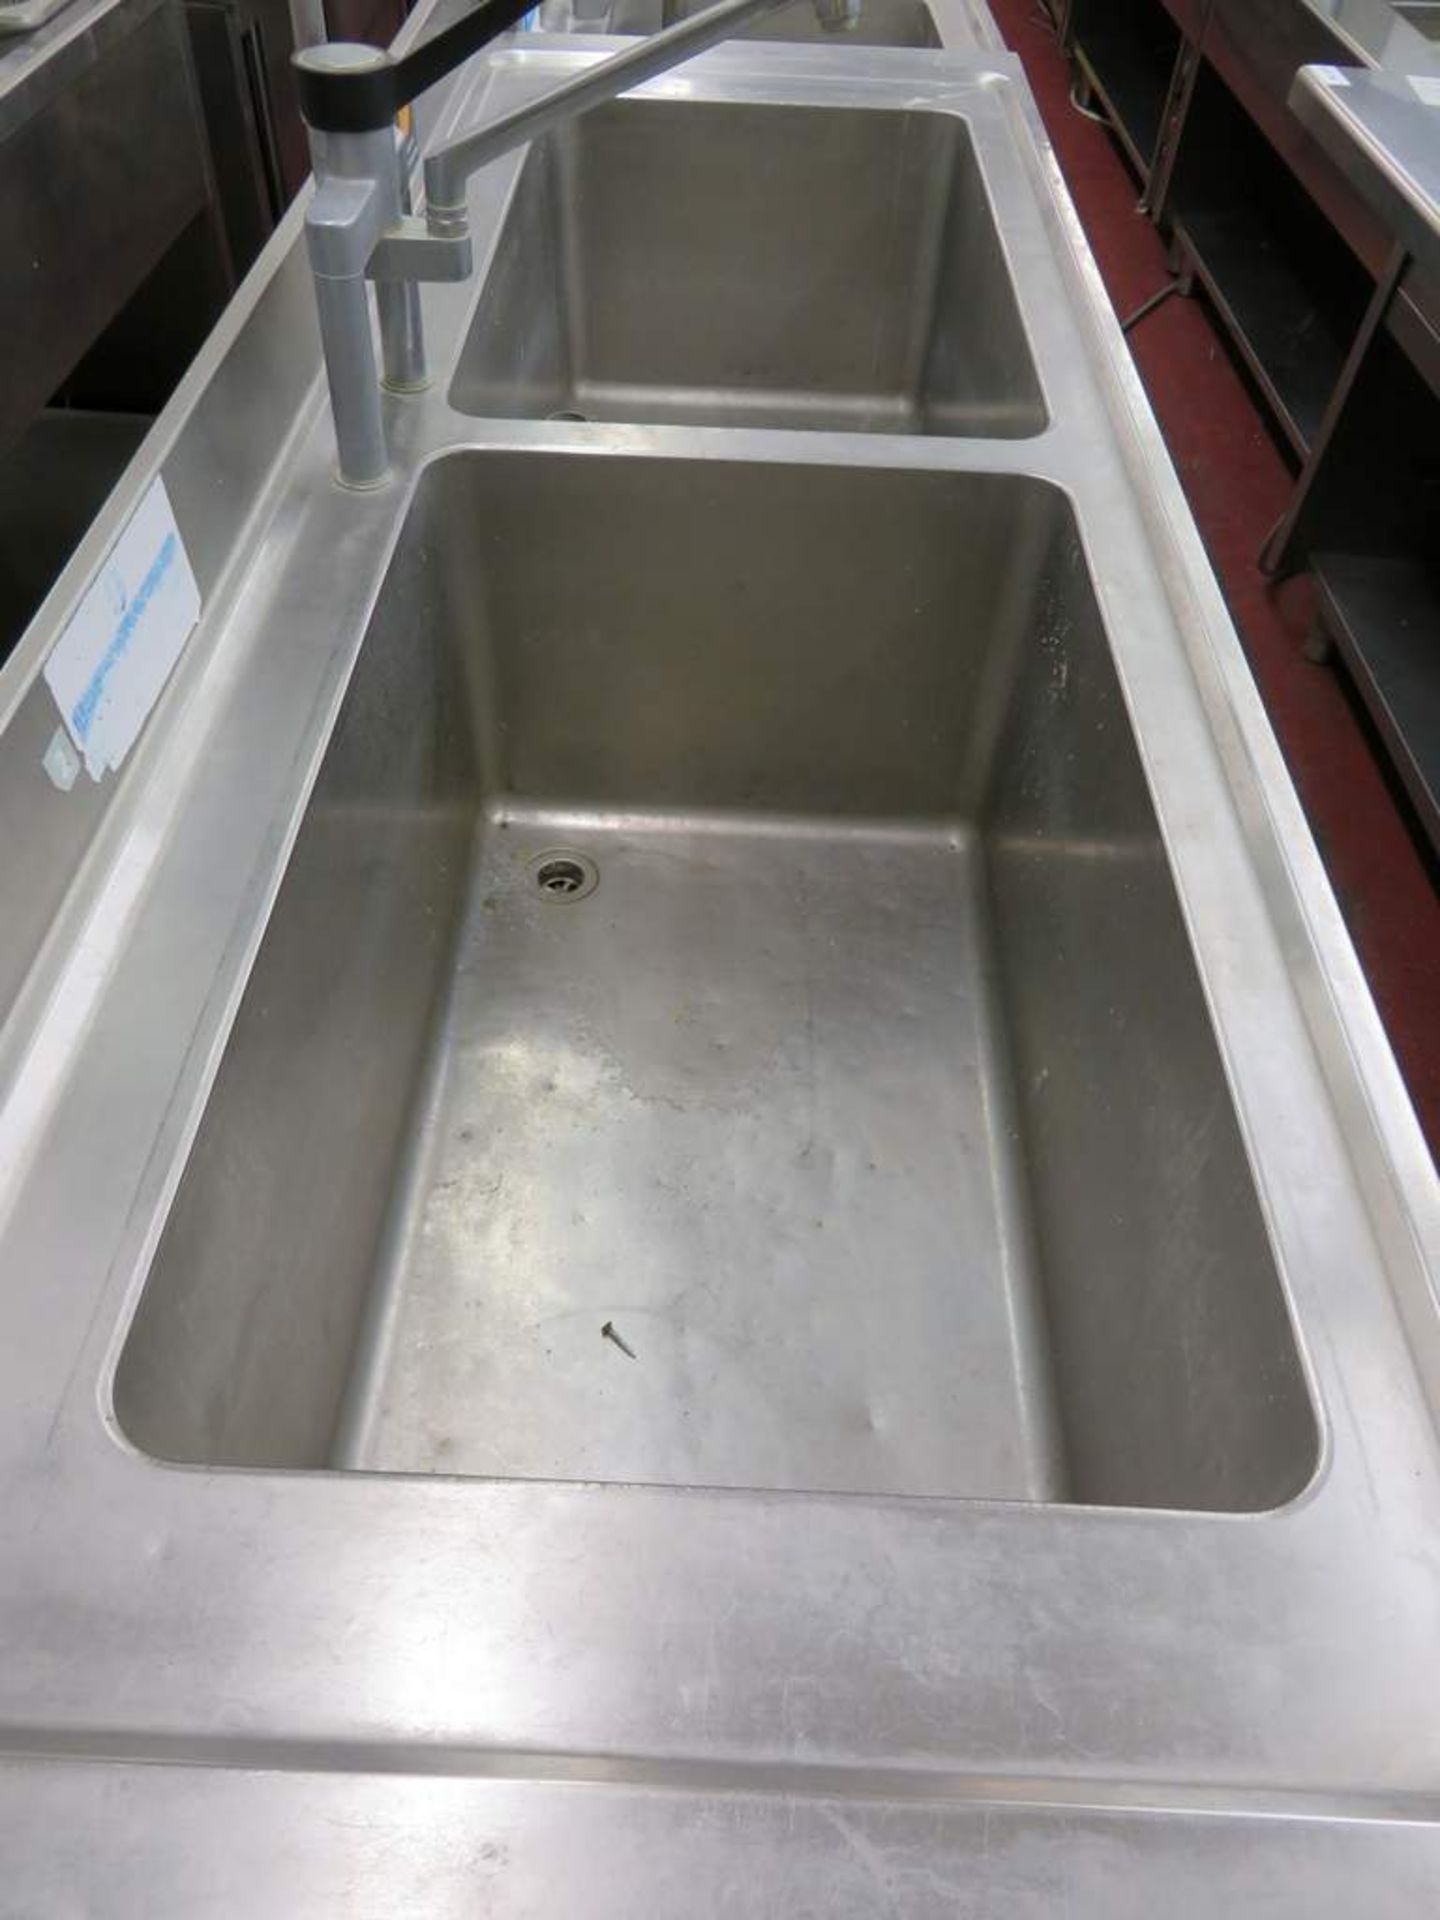 Large stainless steel deep twin basin sink unit - Image 2 of 2